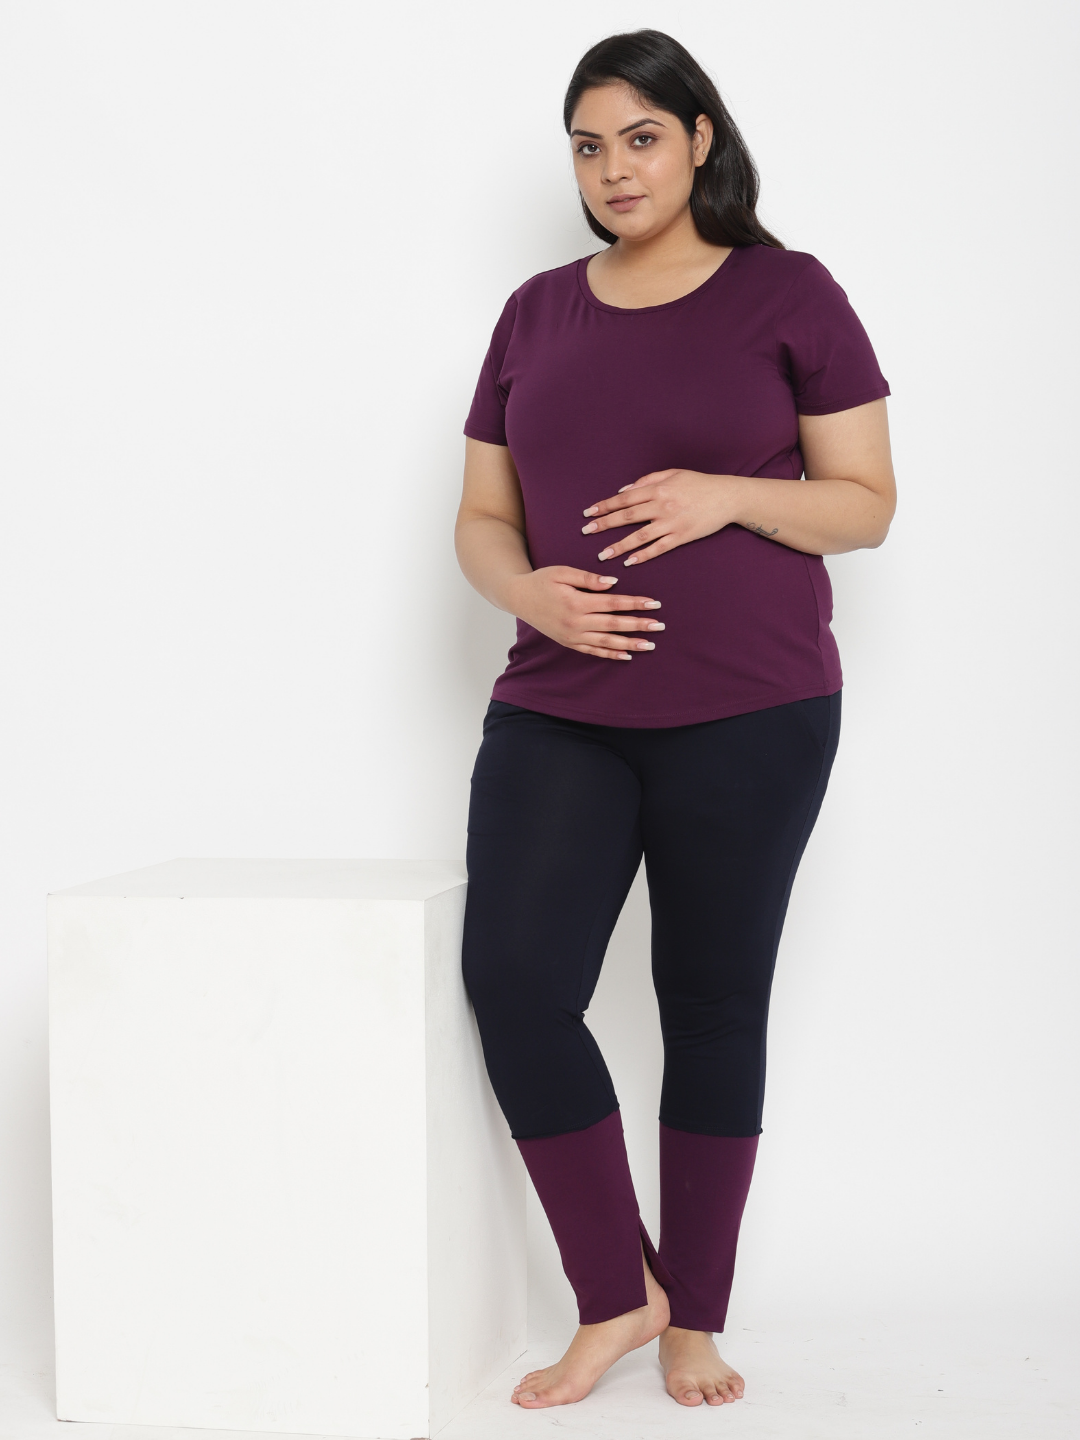  HEGALY Womens Maternity Flare Leggings Over The Belly -  Casual Pregnancy Yoga Pants